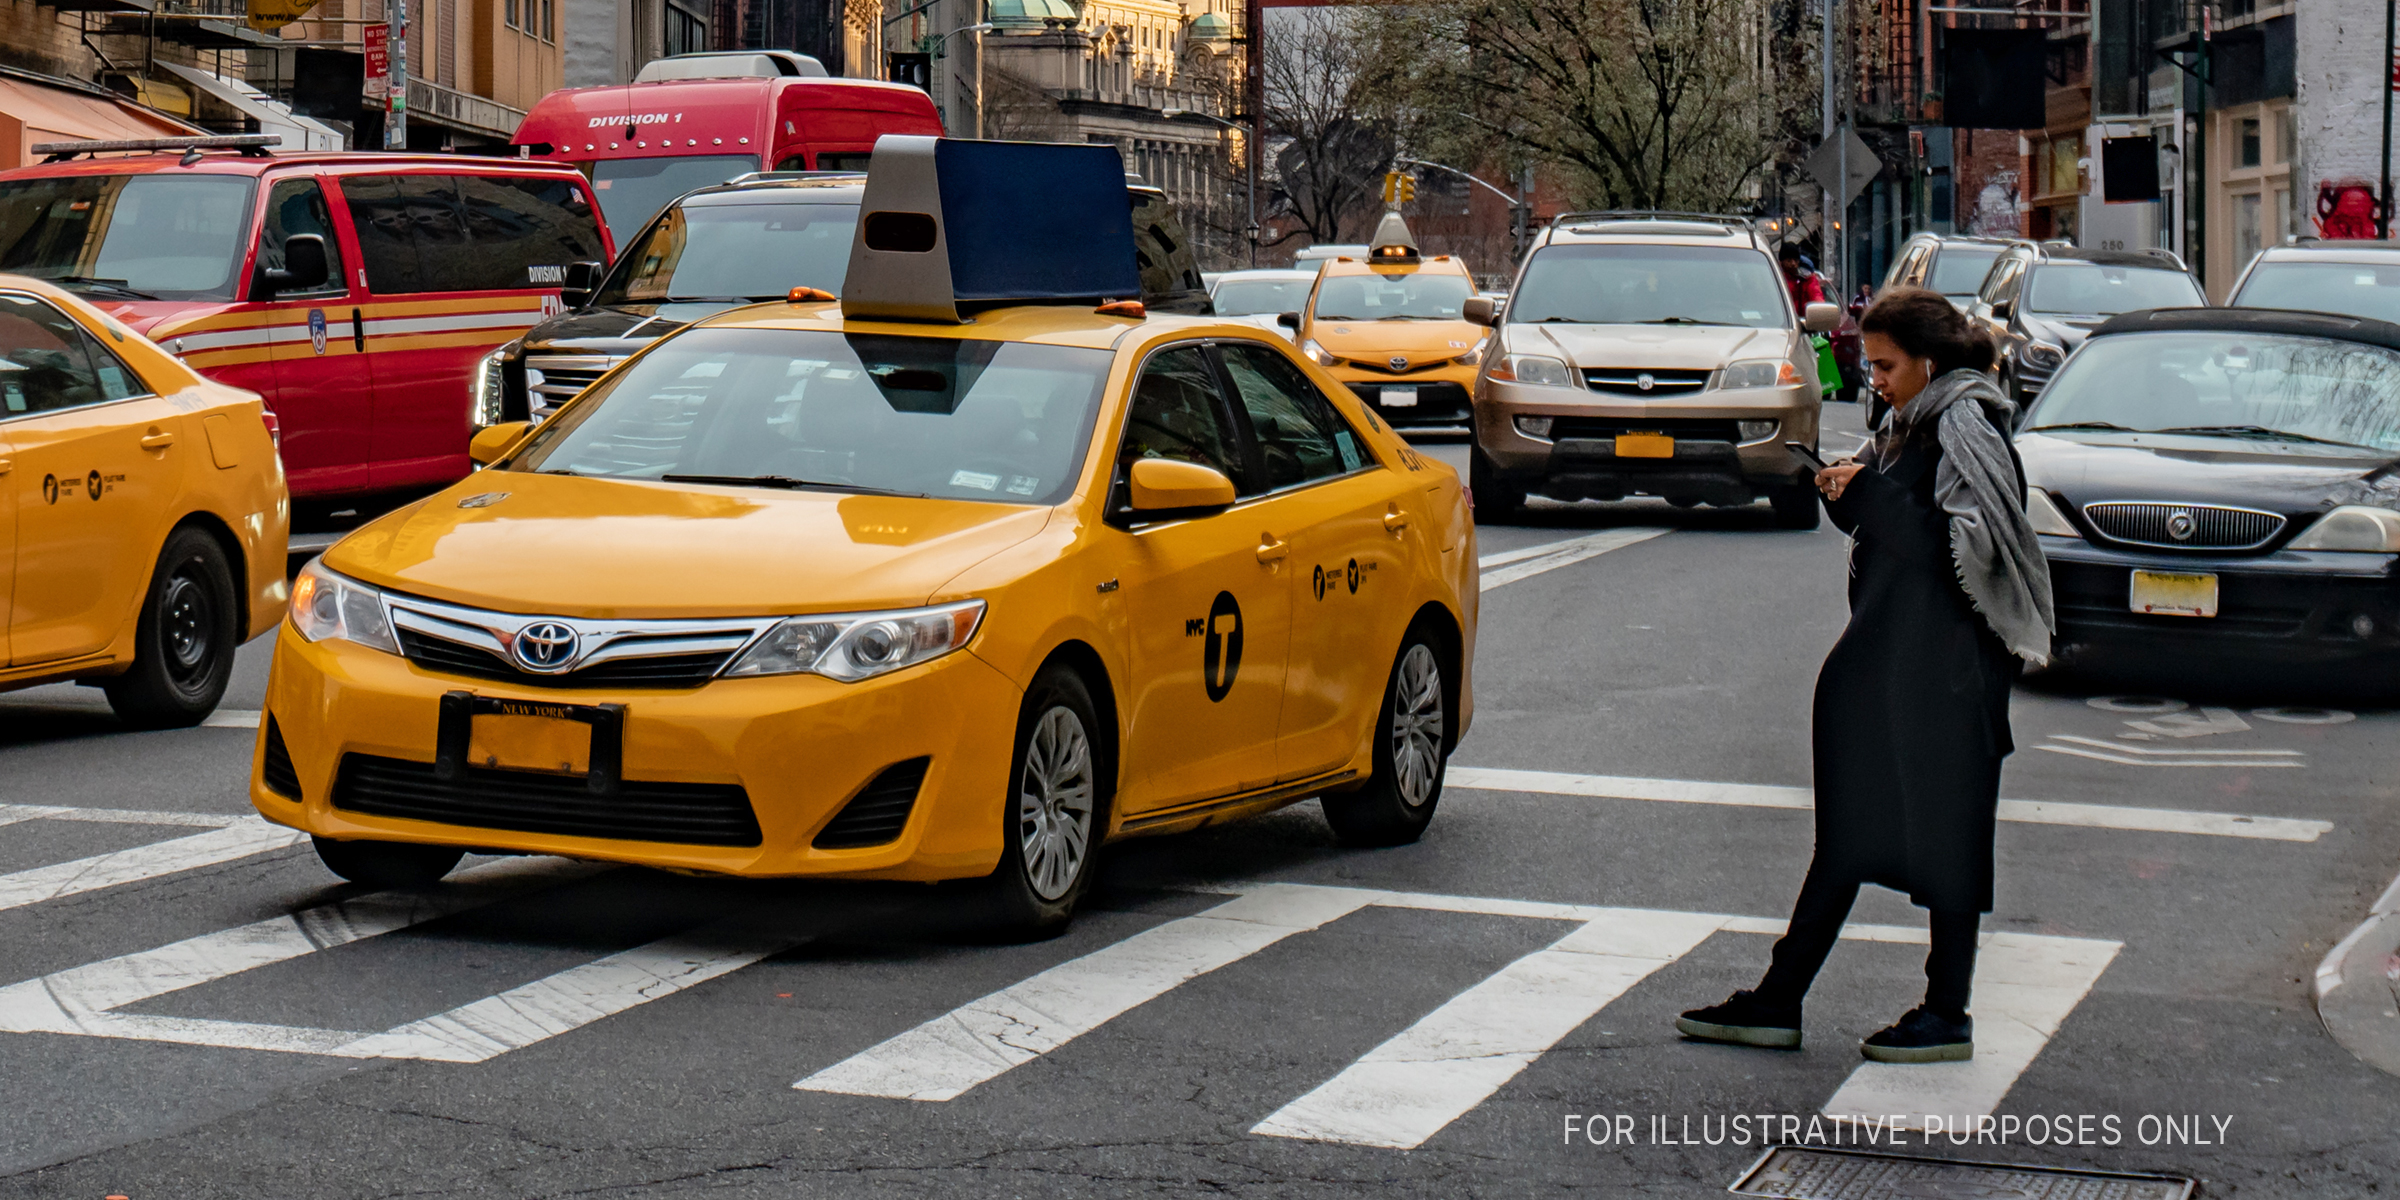 Taxi on a busy road | Source: Shutterstock